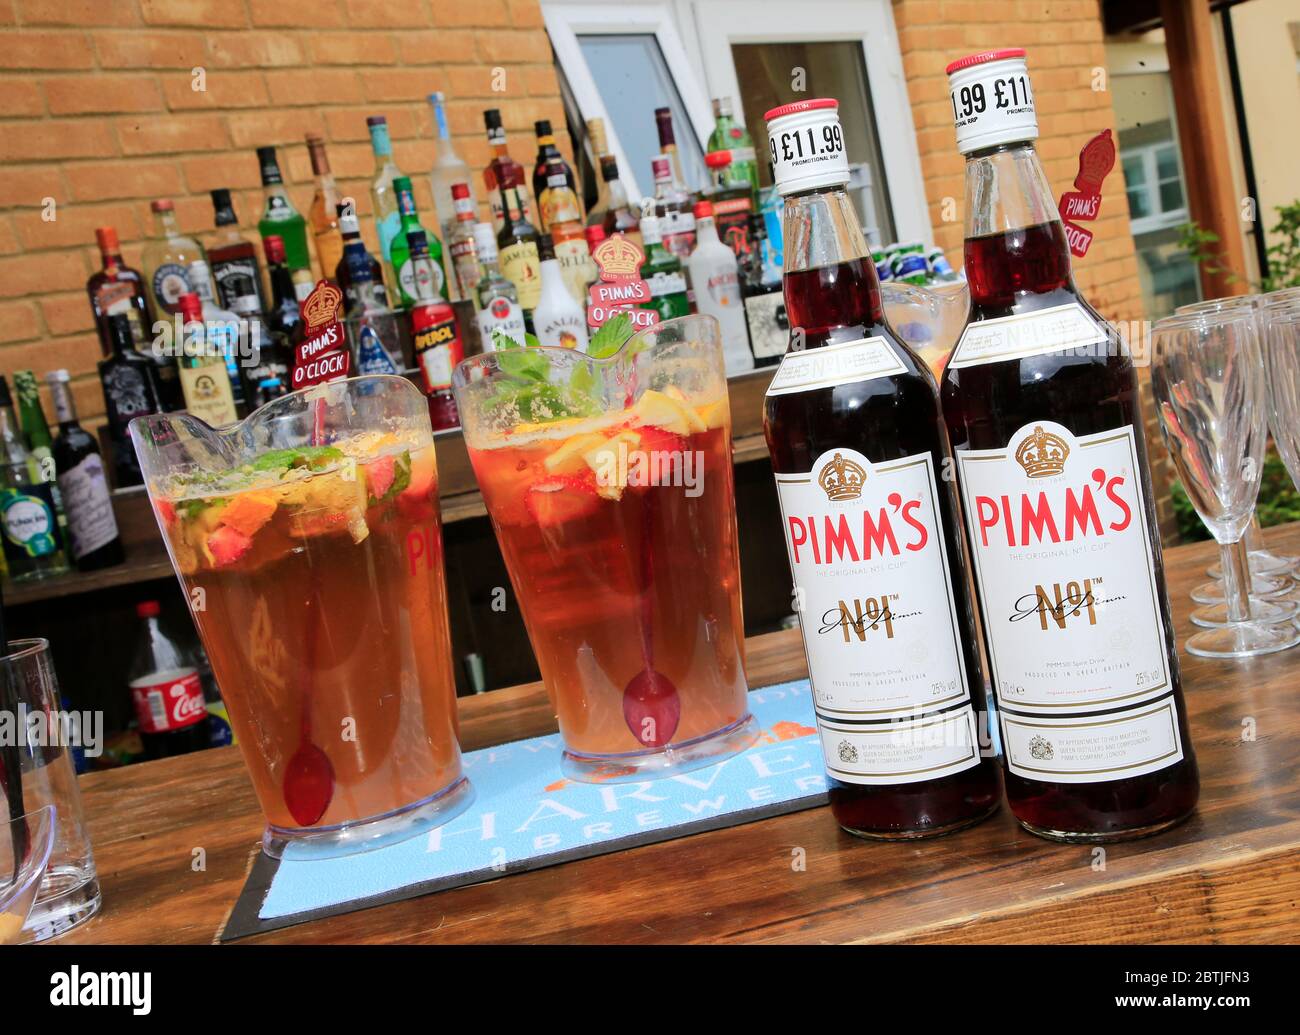 Bottles of Pimms on a bar. Stock Photo